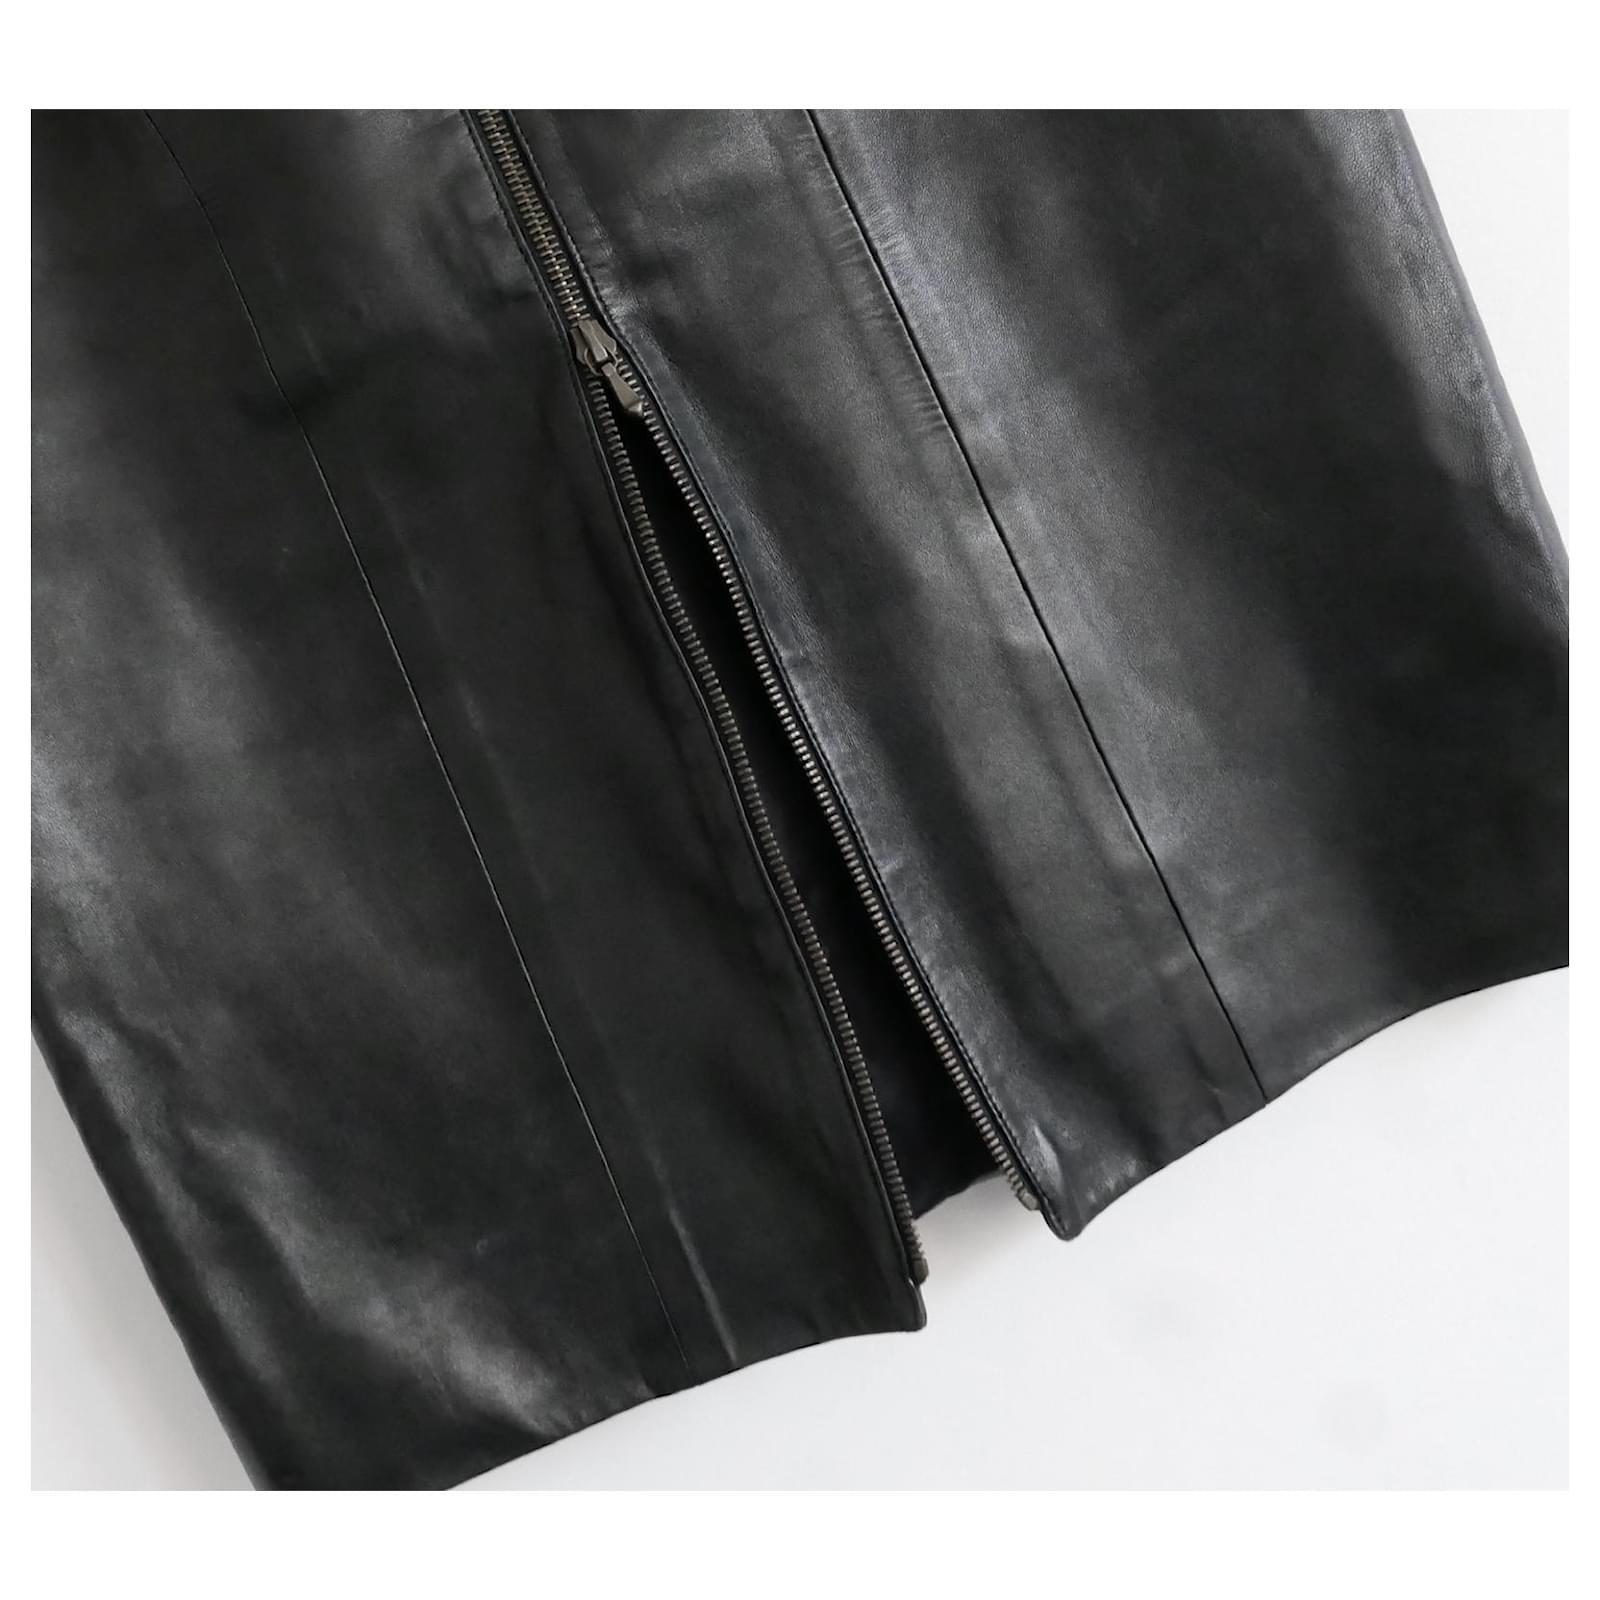 Christian Dior x Galliano AW00 Leather Zip Pencil Skirt In Excellent Condition For Sale In London, GB